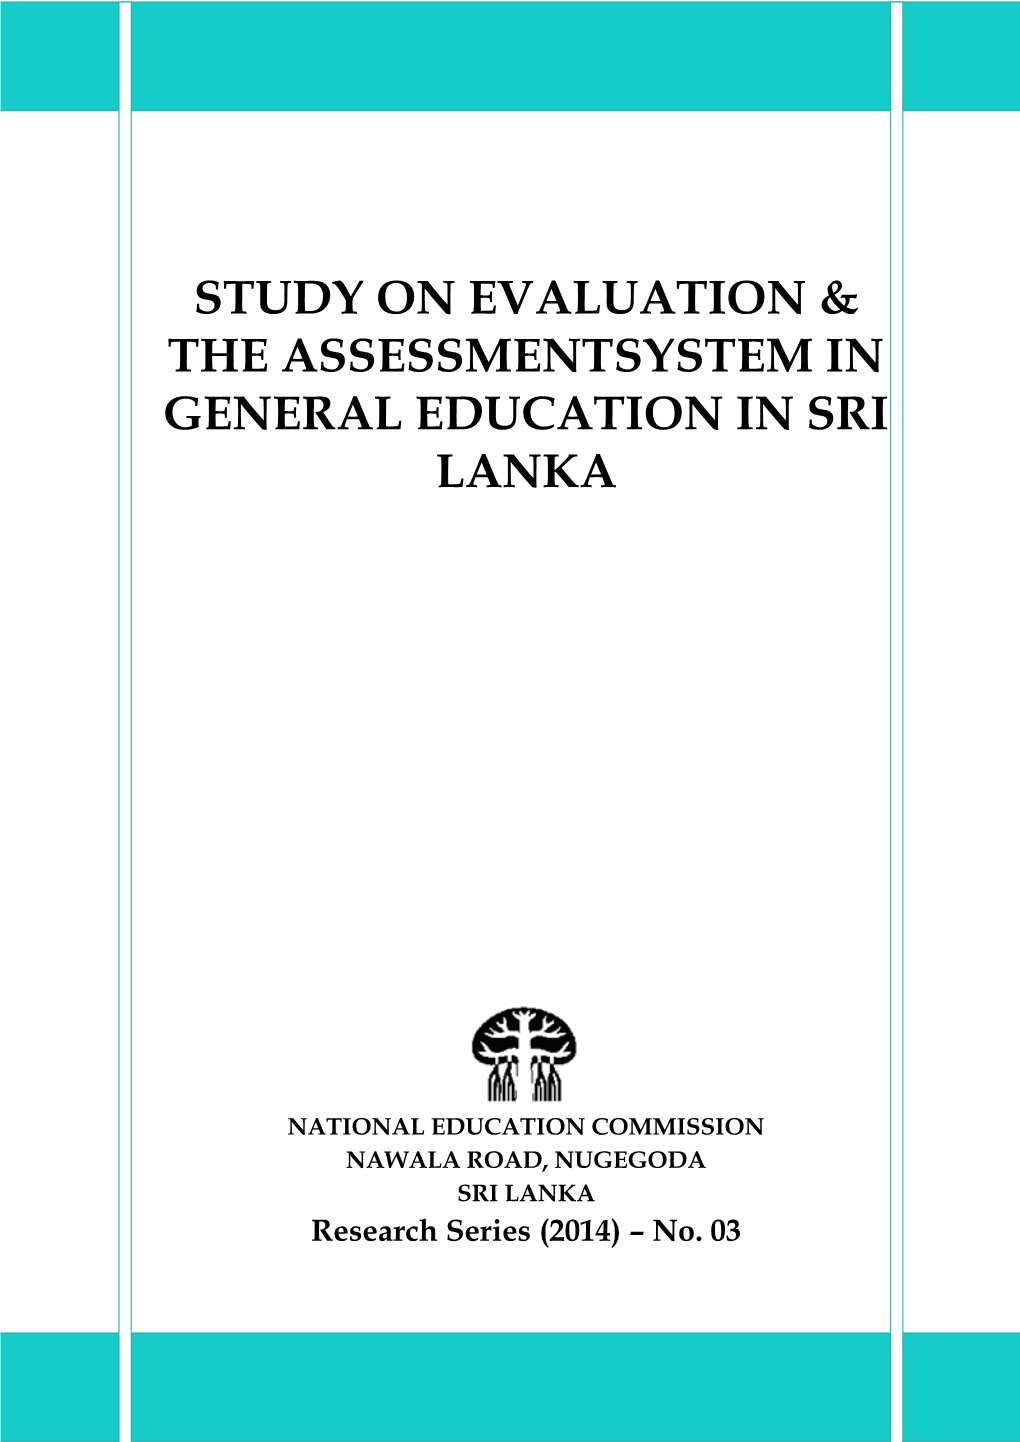 Study on Evaluation & the Assessmentsystem in General